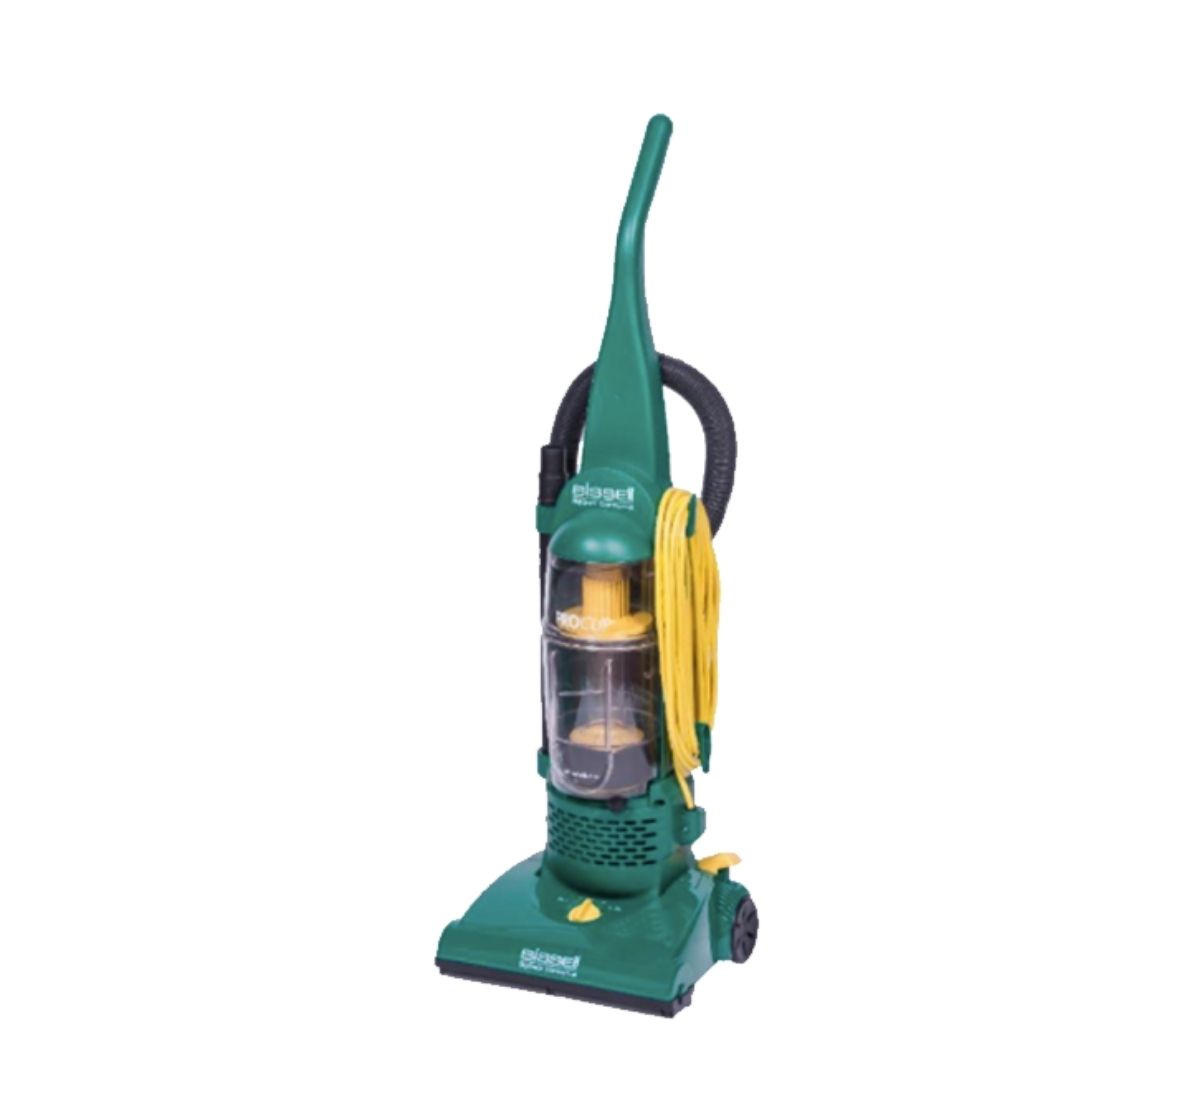 13.5” Pro Cup Single Motor Upright with On Board Tool. Model: BGU1937T